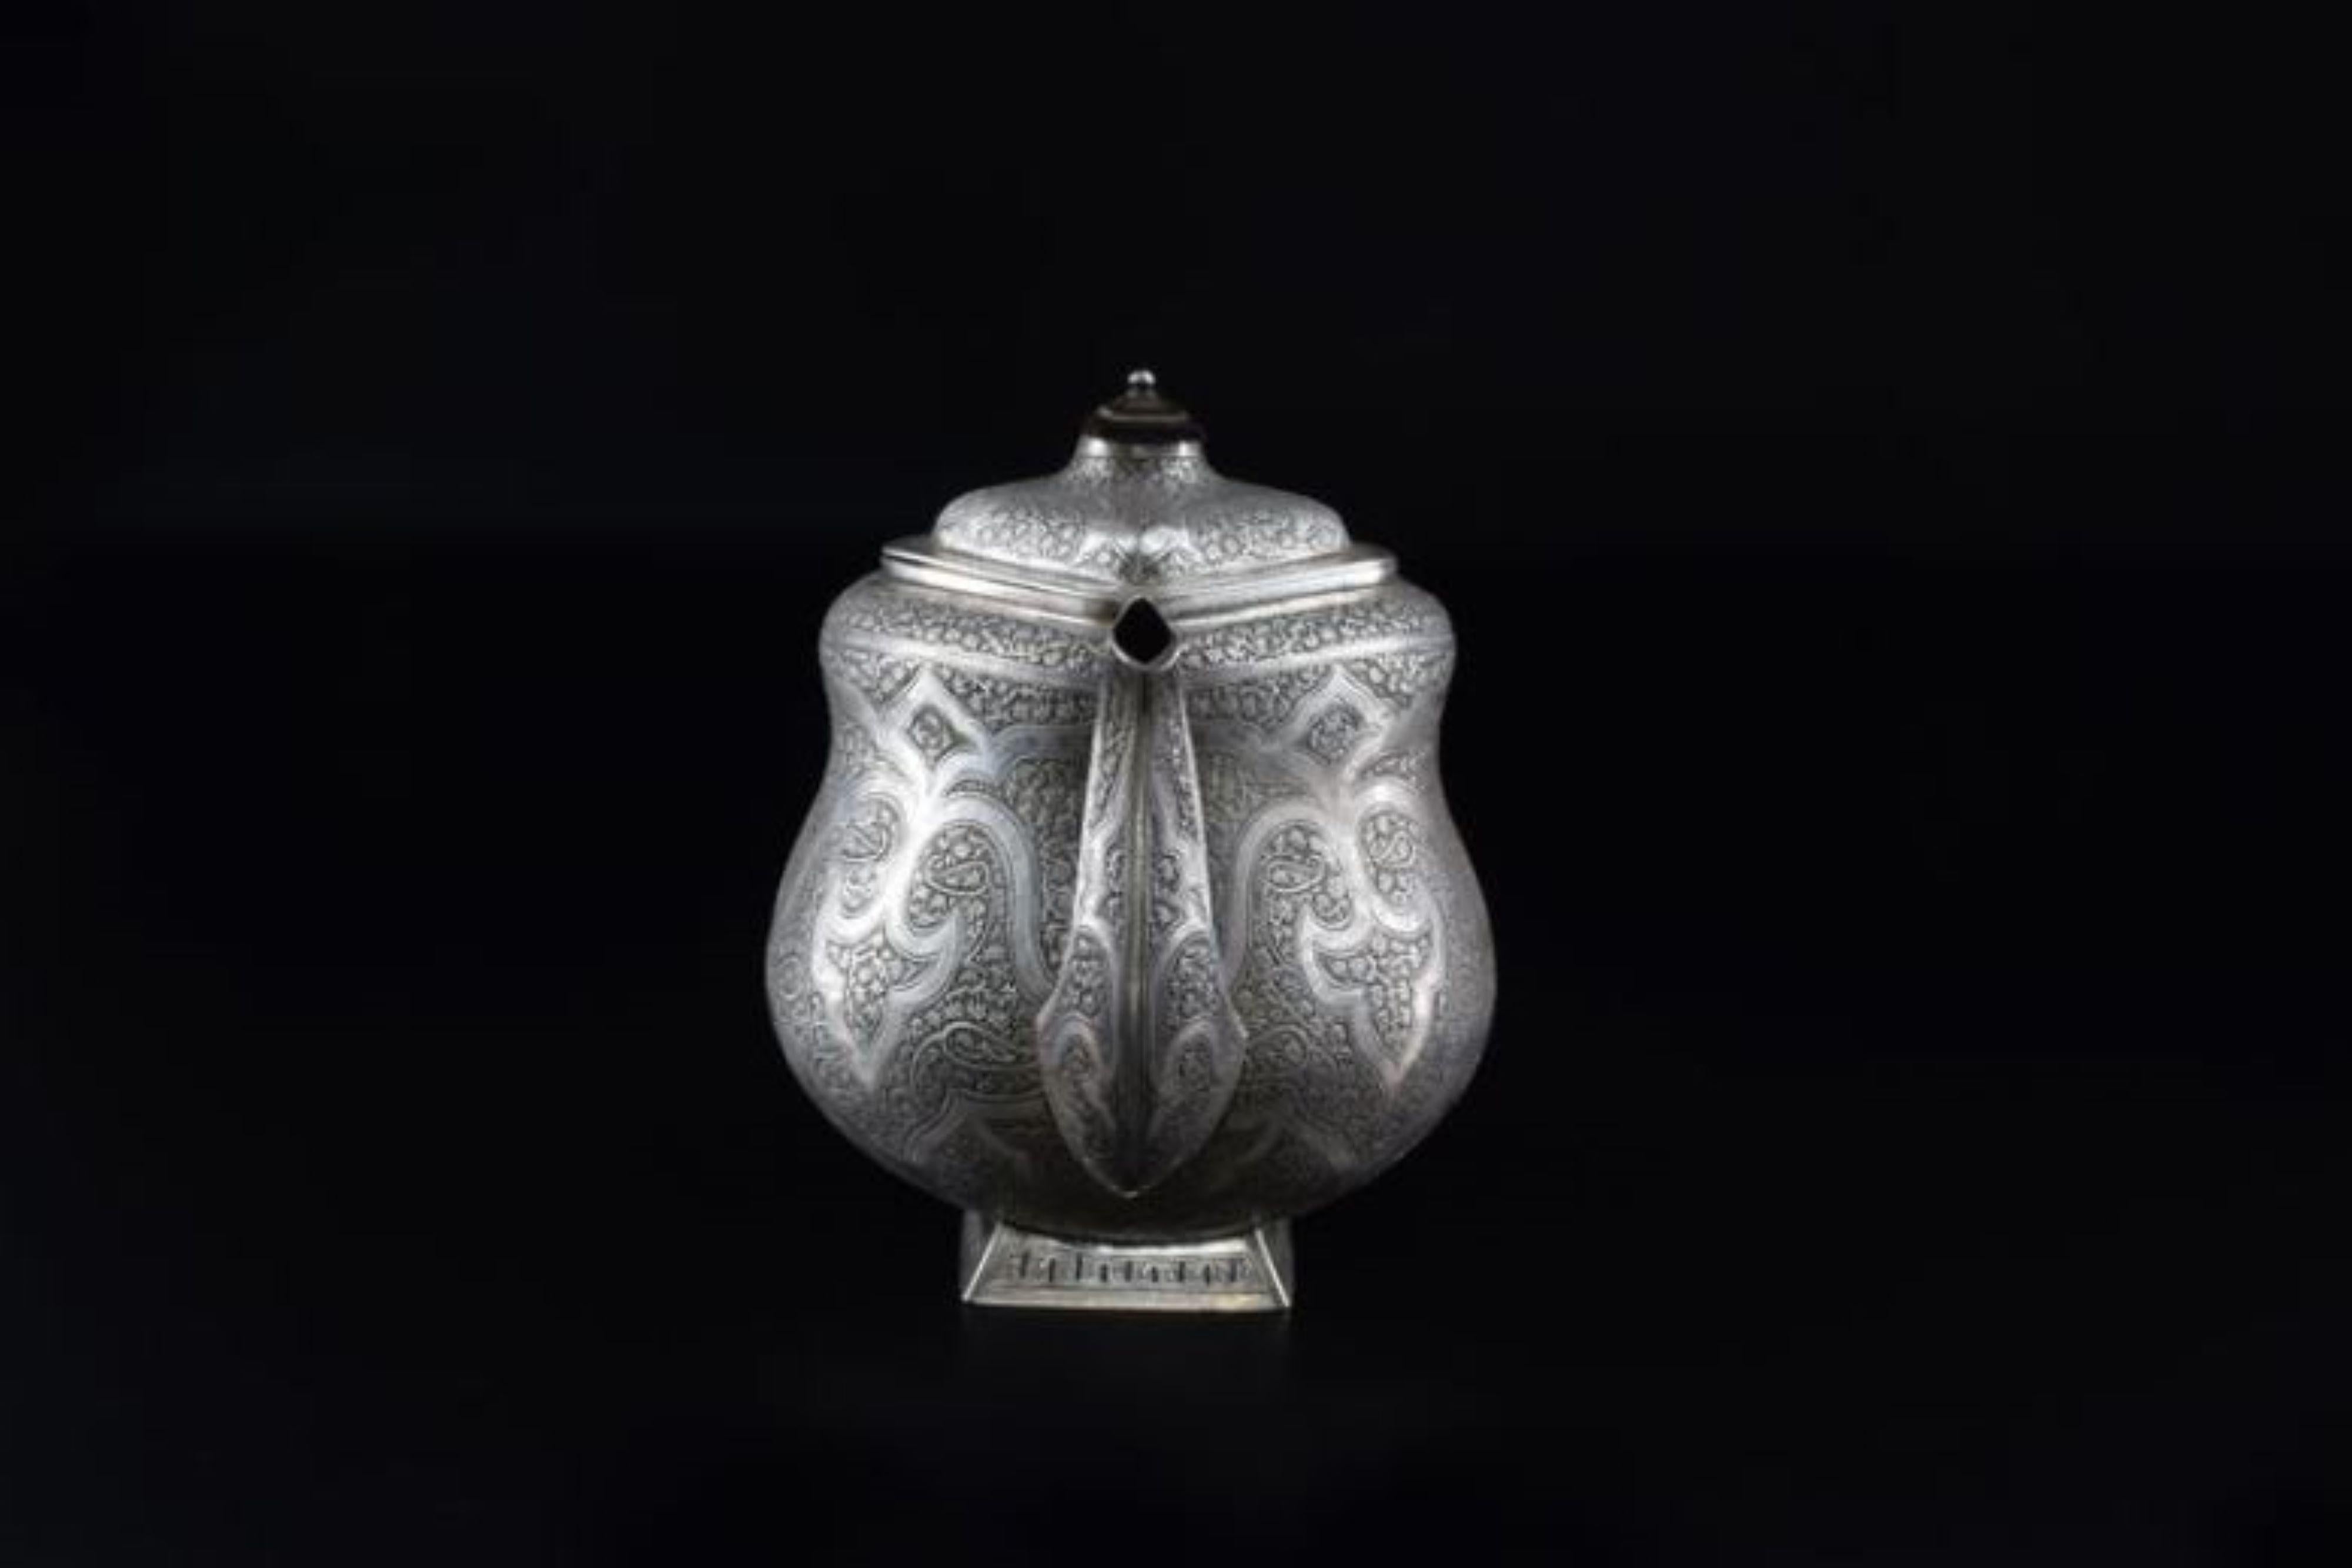 A handcrafted Moorish sterling silver teapot handcrafted in the 1950s. Its wooden handle, meticulously sculpted, complements the silver. What truly sets this piece apart are the intricate engraved Moorish patterns.

Weighing 766g, this teapot is